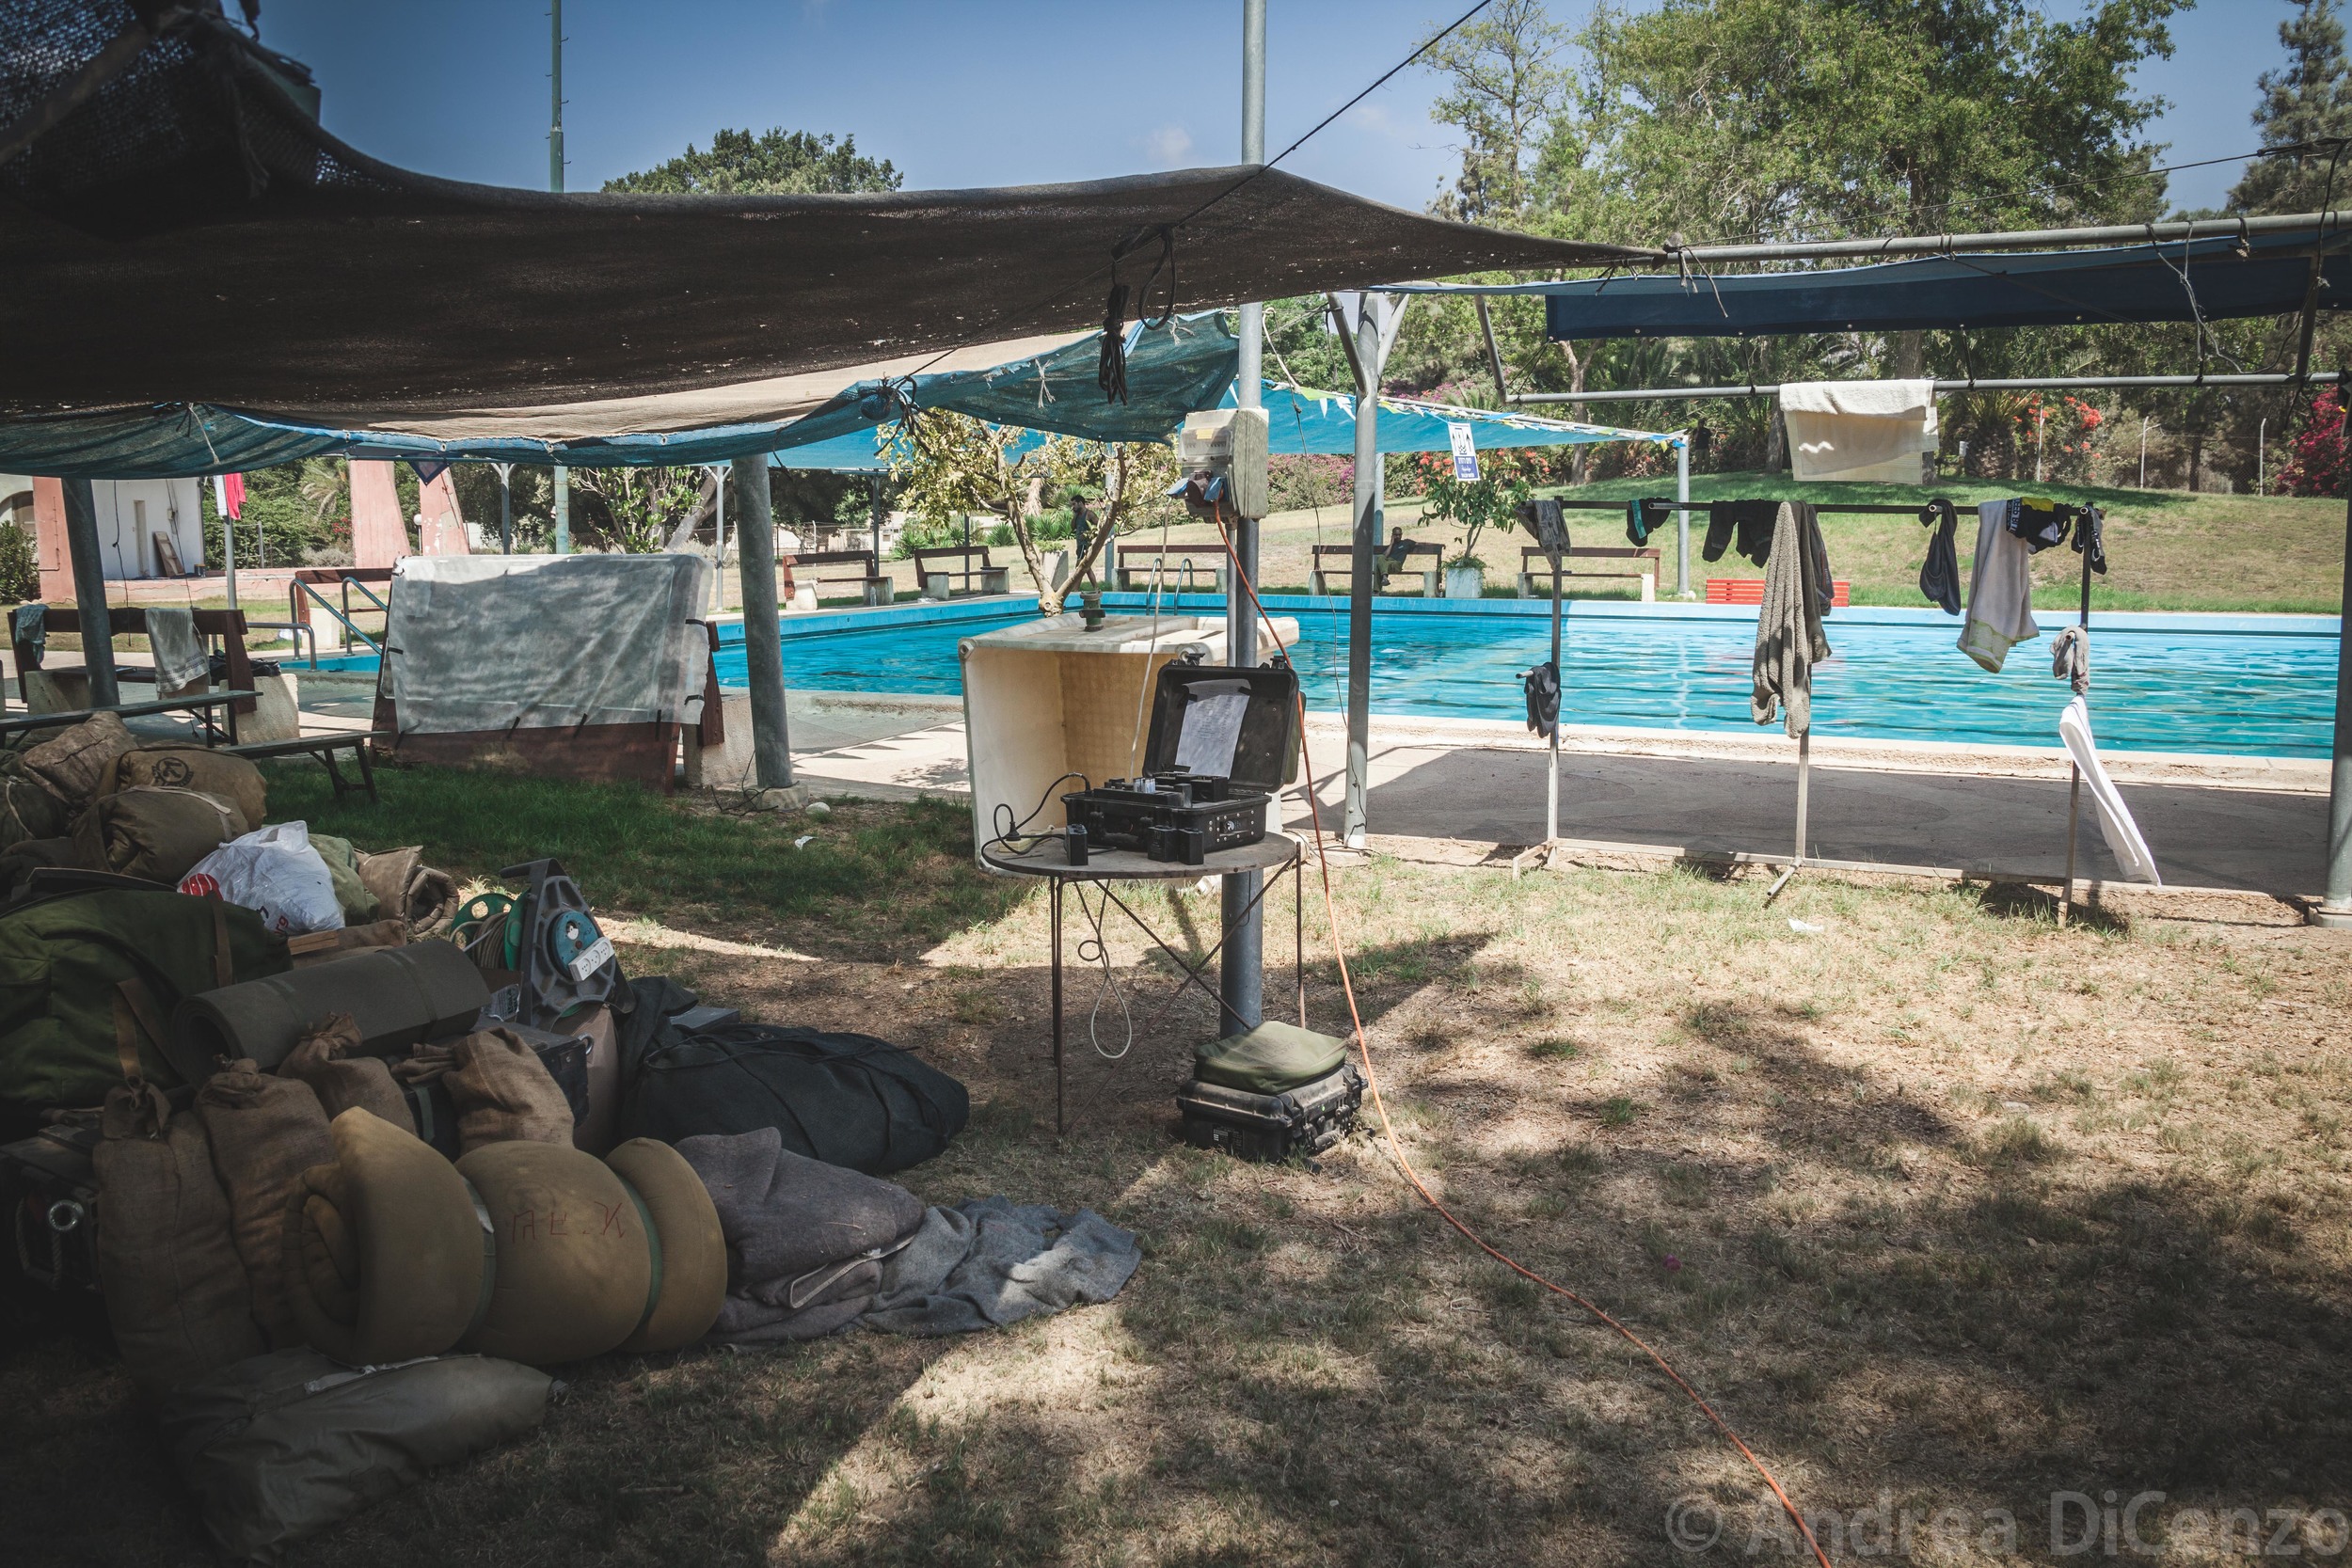  A community pool in&nbsp;kibbutz Nirim is now a temporary home stay to thirty to forty soldiers - many who are from the surrounding region. Because Nirim is in direct and constant threat from Gazan militants, soldiers have been stationed at the kibb